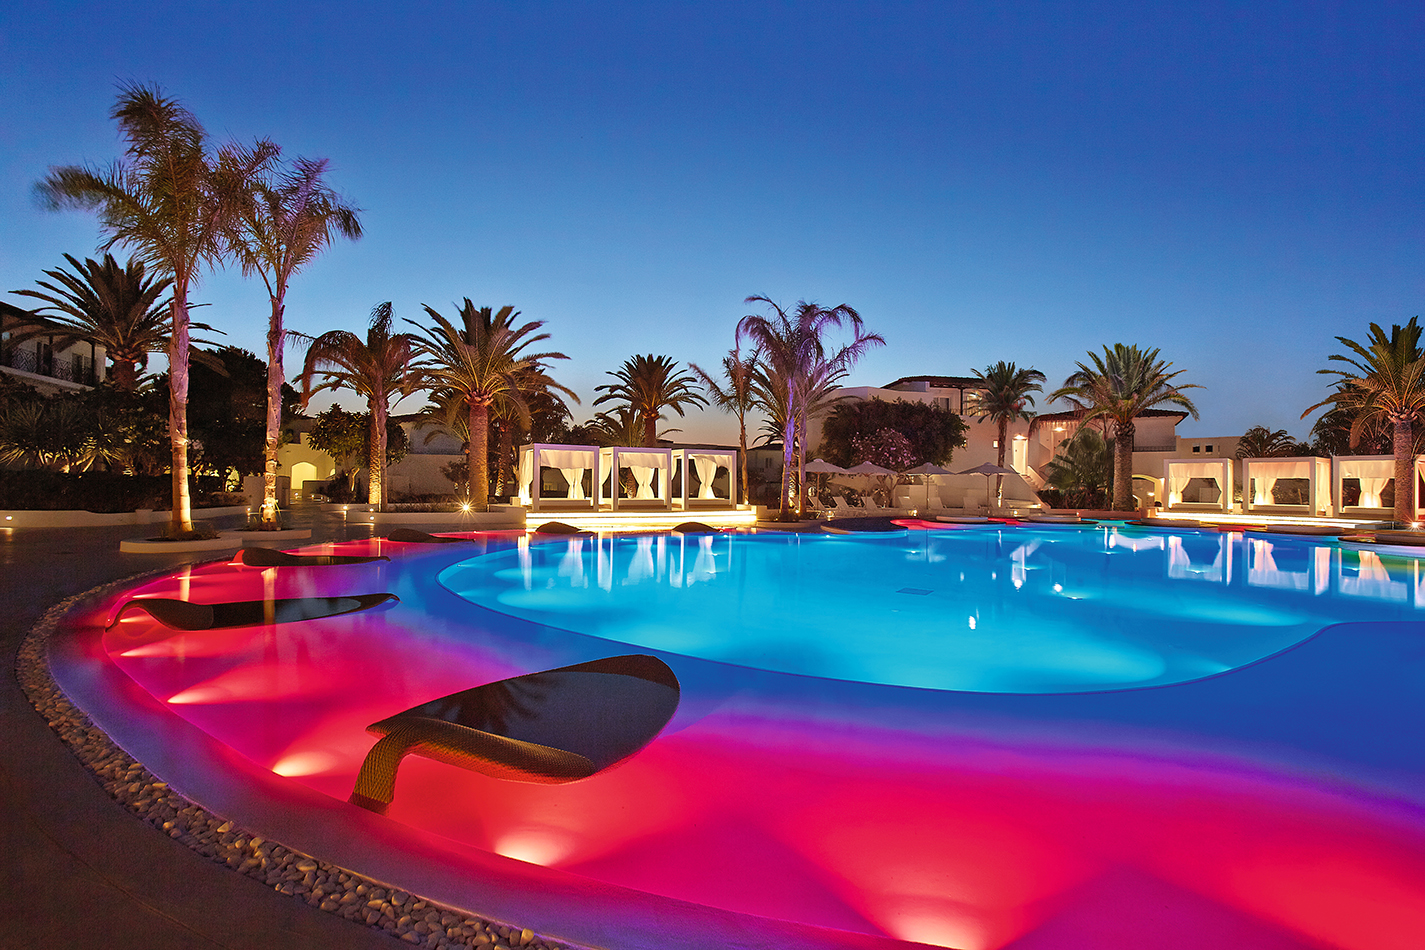 Caramel_01_Confetti-Pool-Lounges-at-night